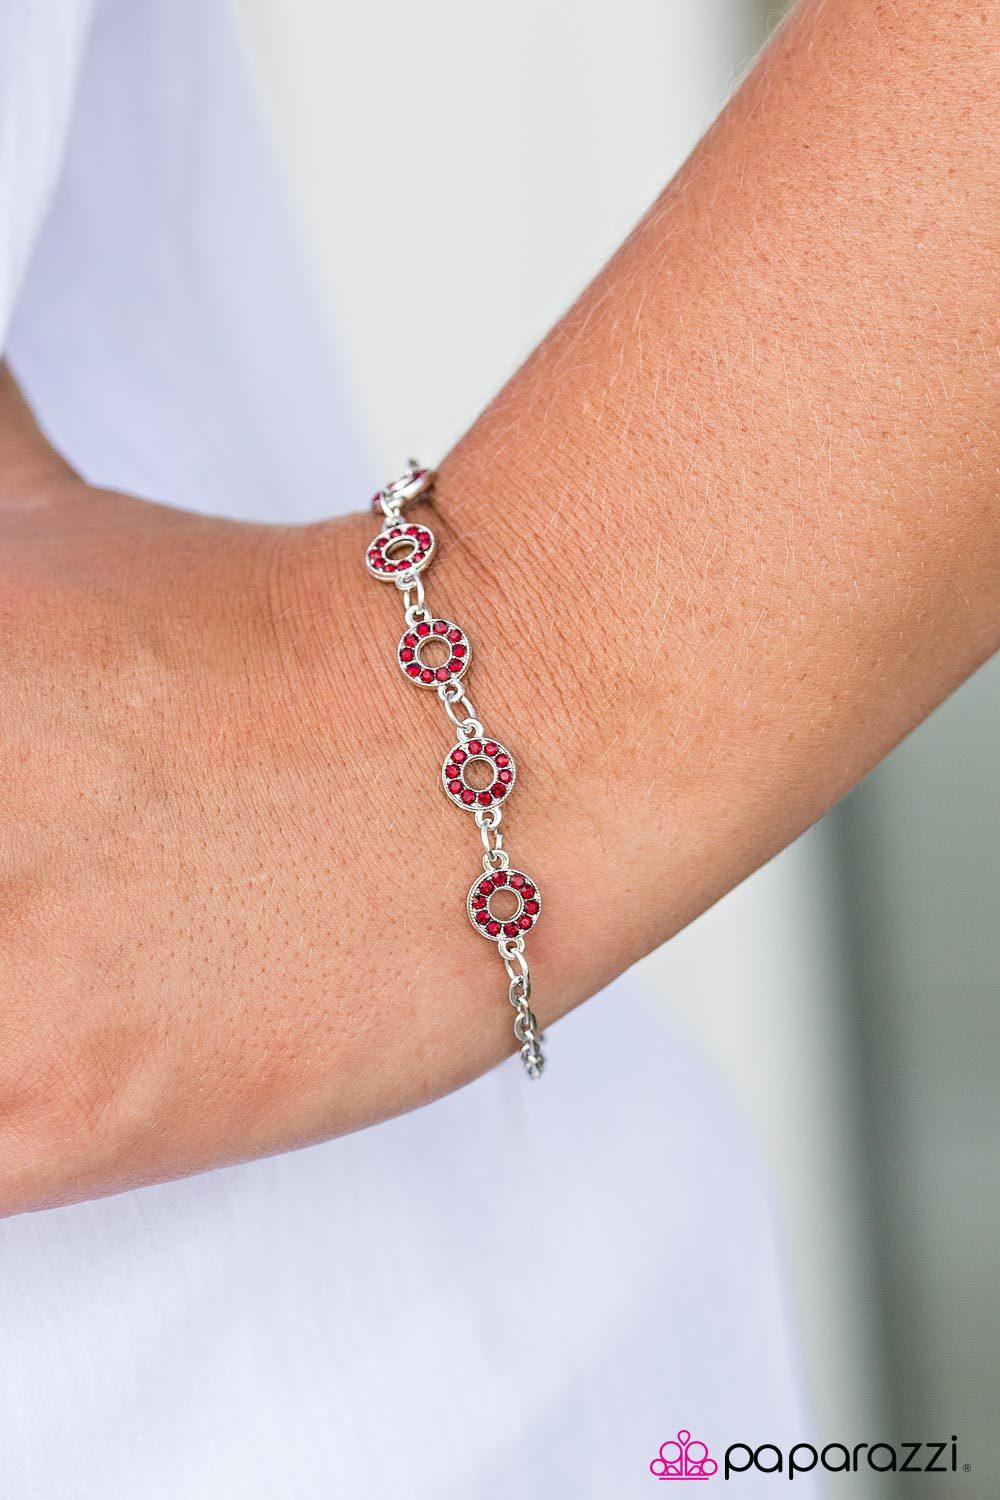 This Time Around Red Gem Bracelet - Paparazzi Accessories-CarasShop.com - $5 Jewelry by Cara Jewels